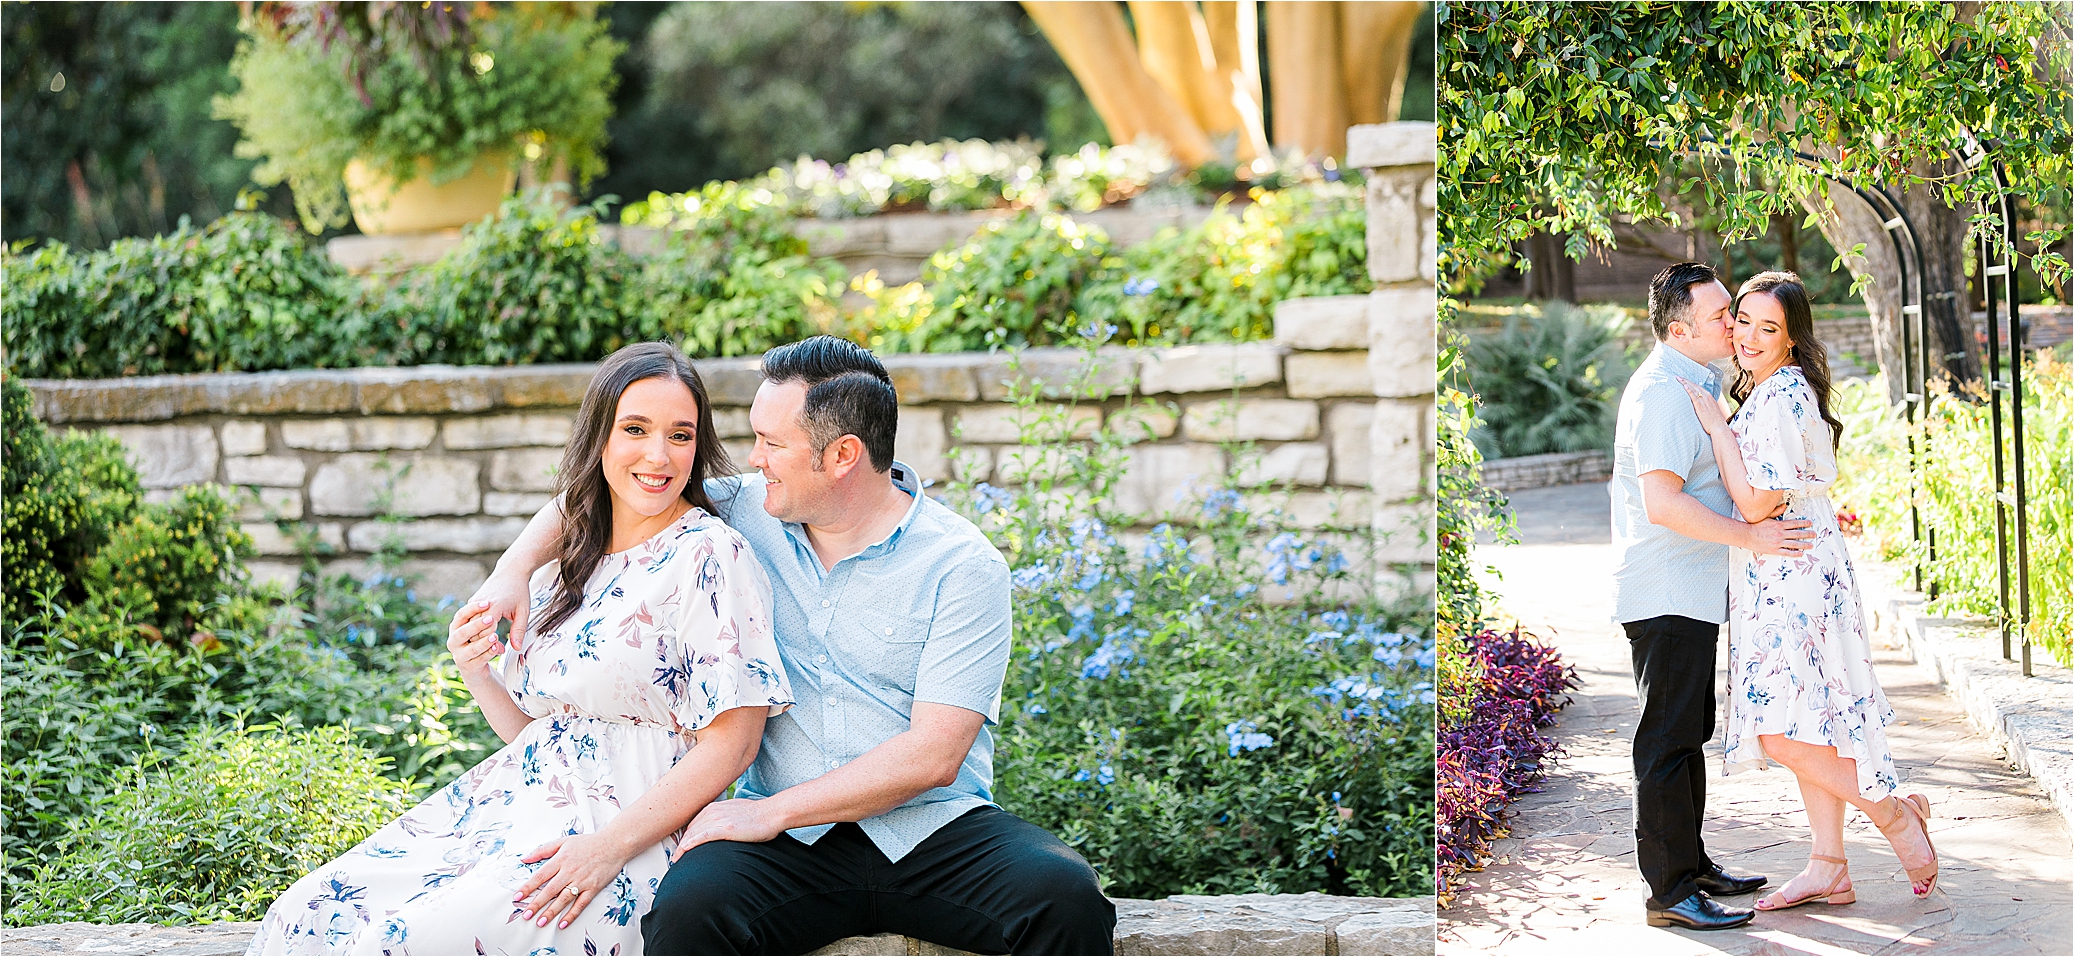 A couple hugs and shares a kiss during their engagement session at The Fort Worth Botanic Garden